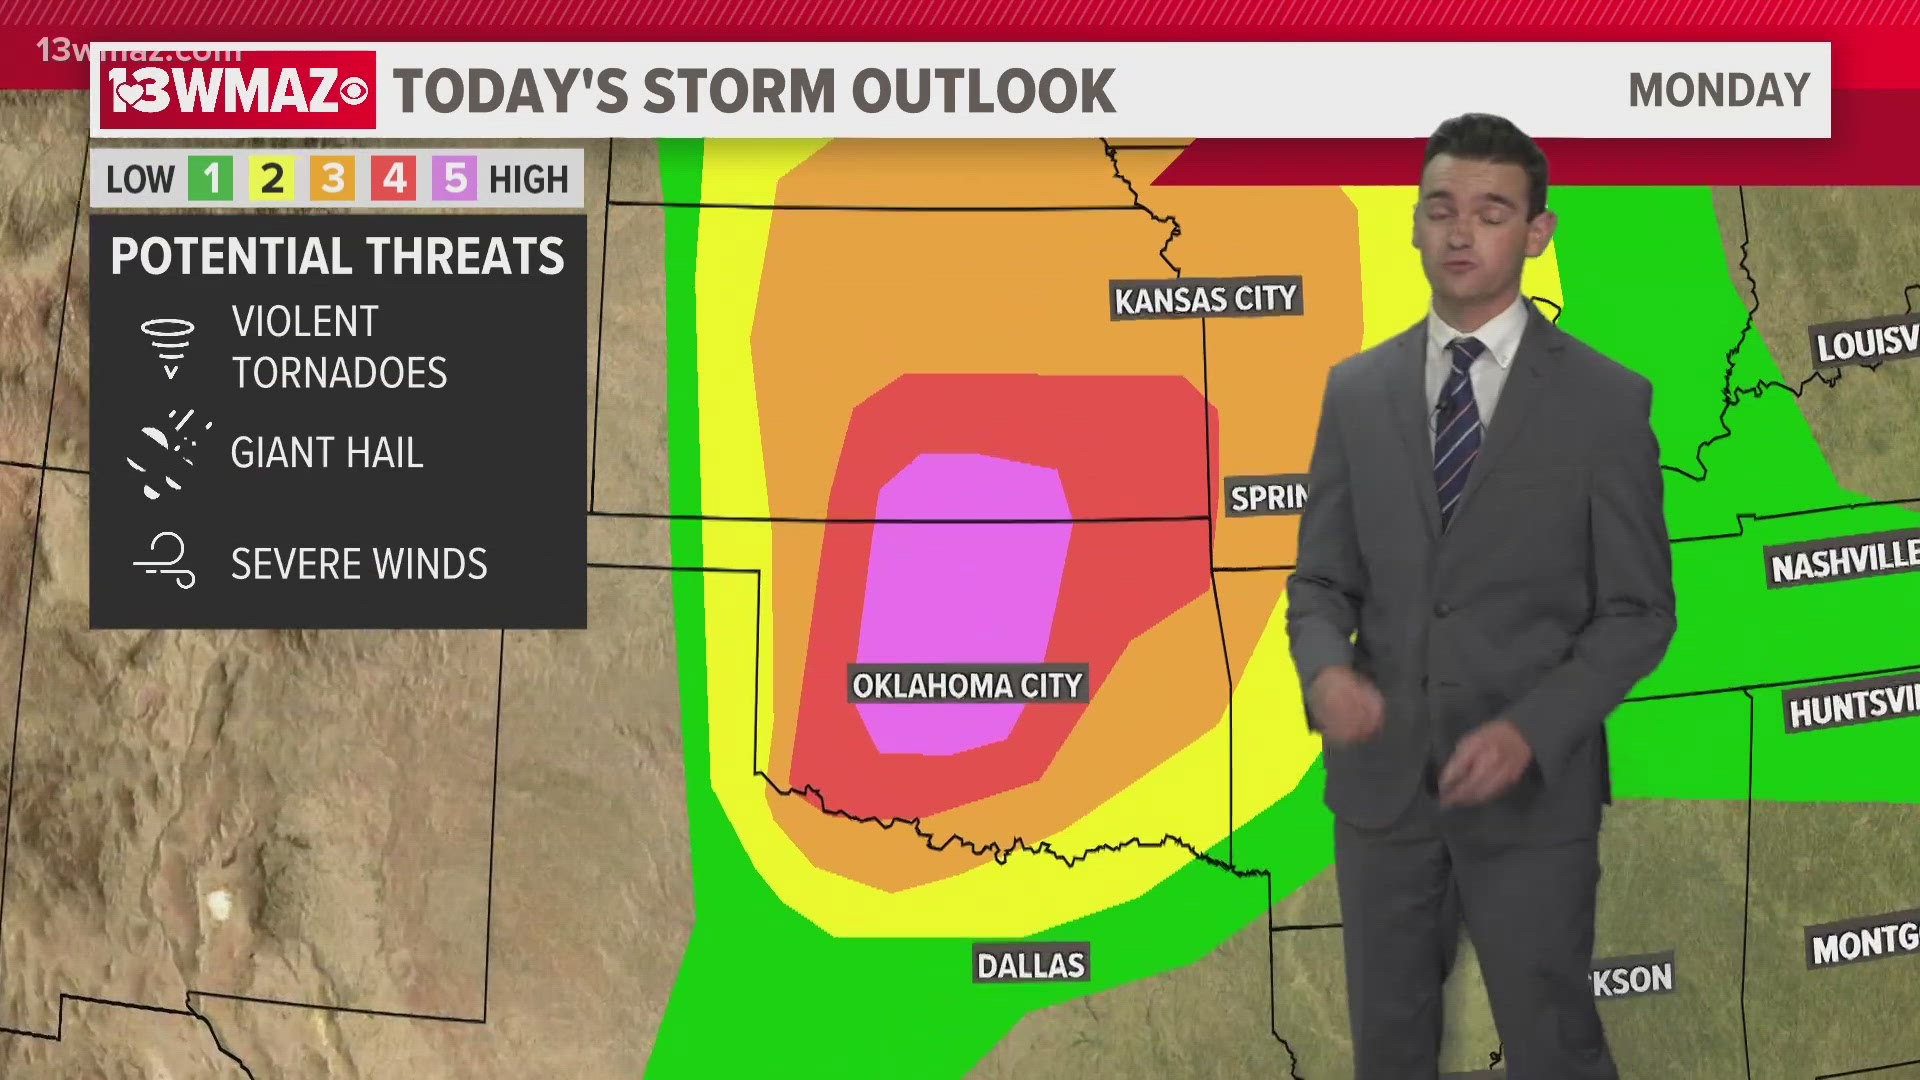 Breaking down today's Level 5 severe weather risk in Oklahoma and central Georgia's history of Level 5 risks in the past.